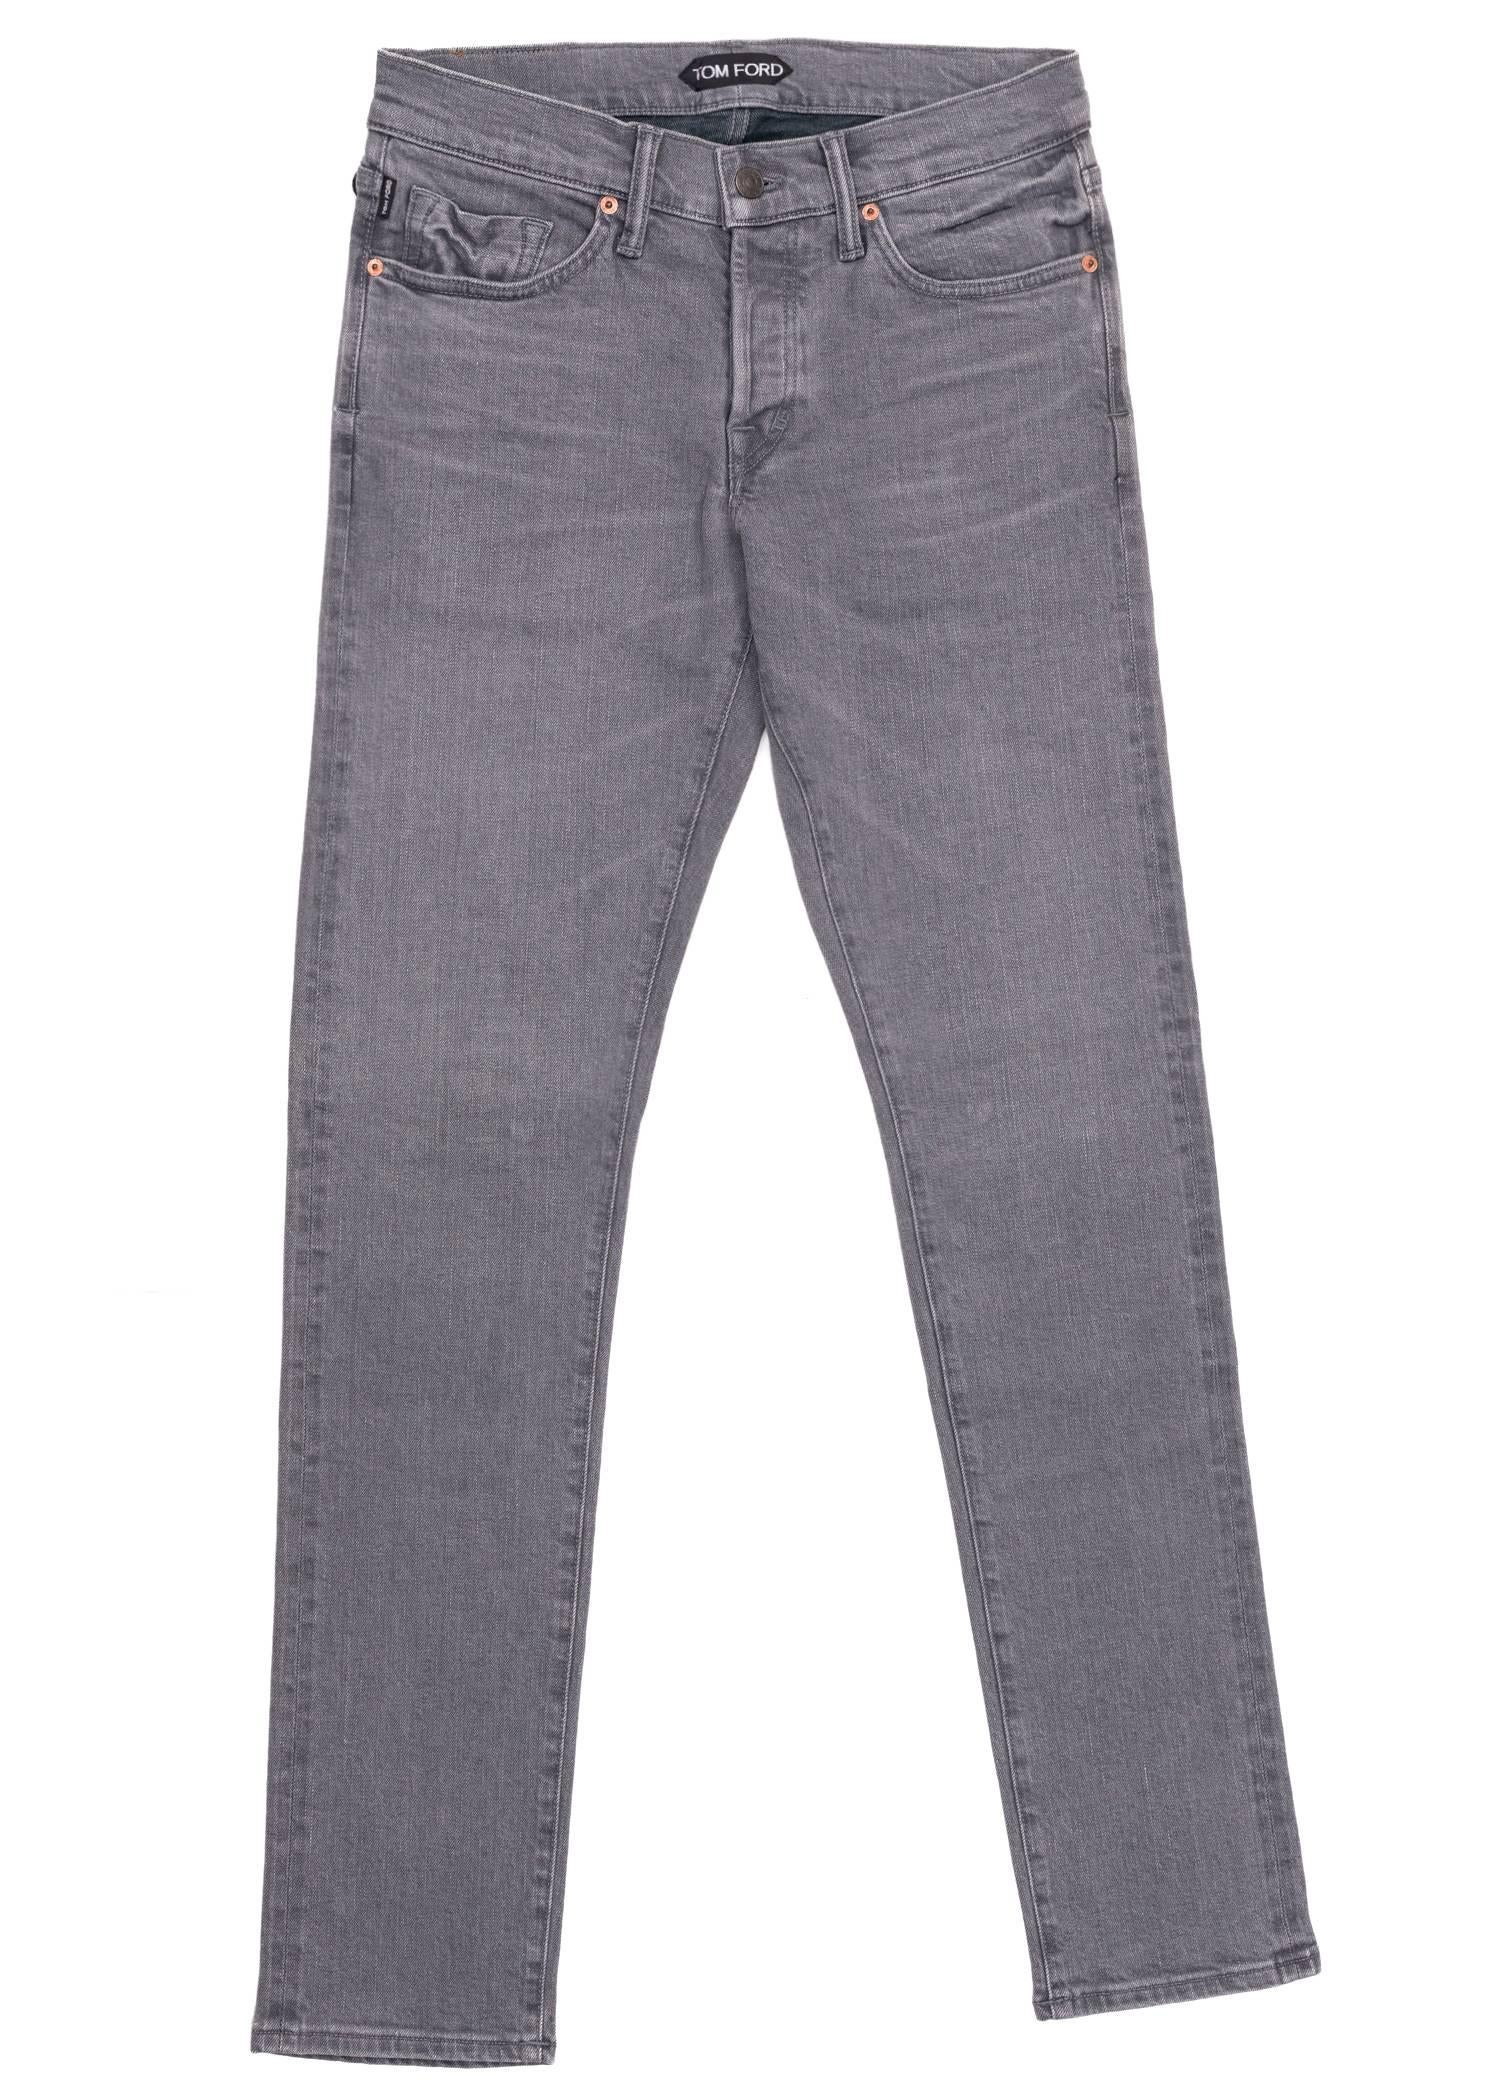 Step things up a notch in your long lasting Tom Ford Selvedge Jeans. This durable pair was designed using firm aerated cotton, a regular fit, and a four button front fly design. Pair these jeans with a relaxed top for the perfect all casual